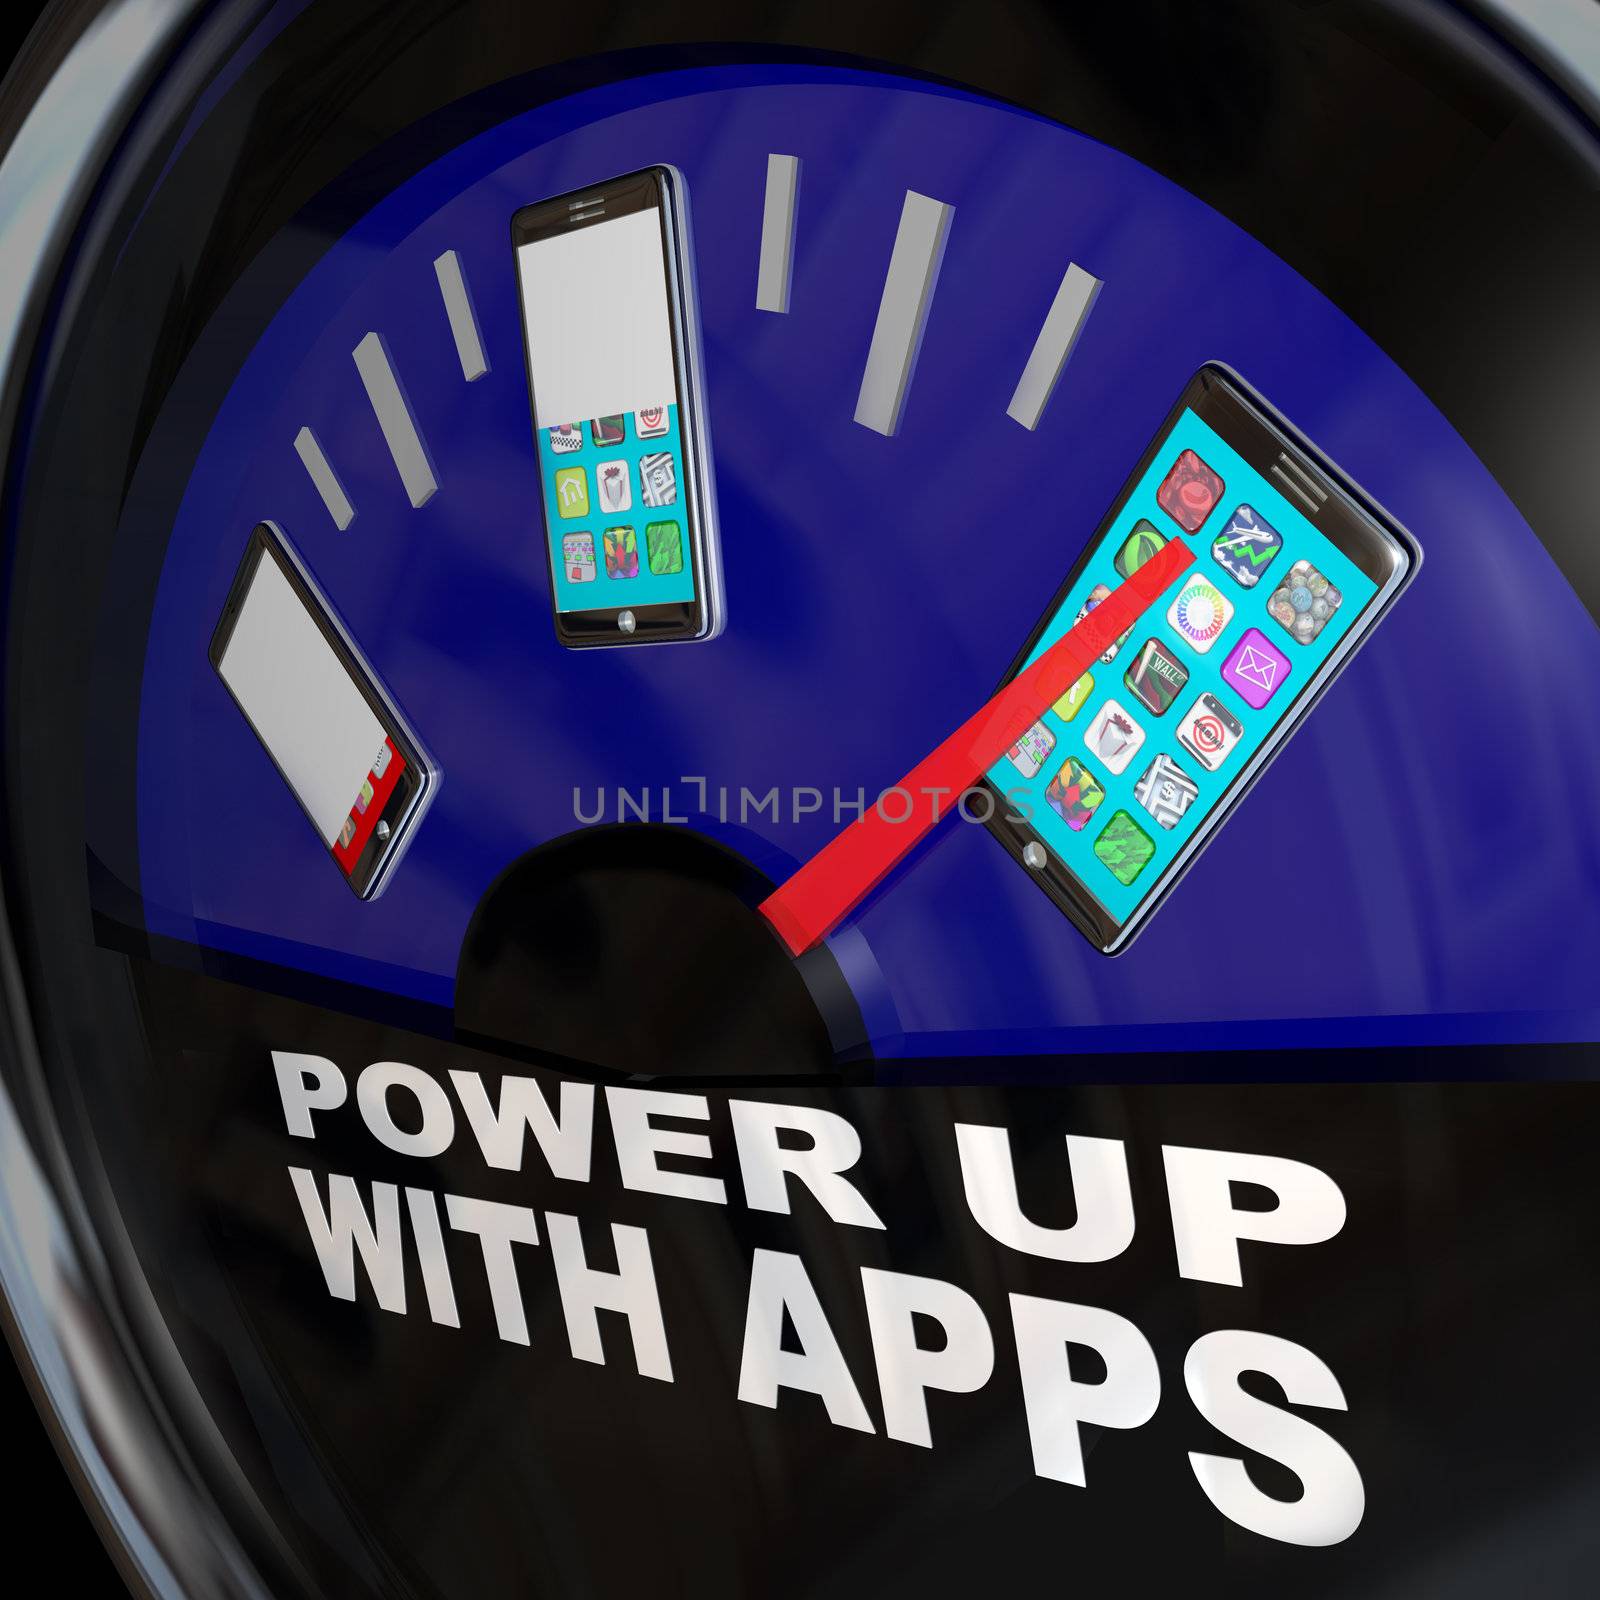 Fuel Gauge Apps Smart Phone Full of Applications by iQoncept